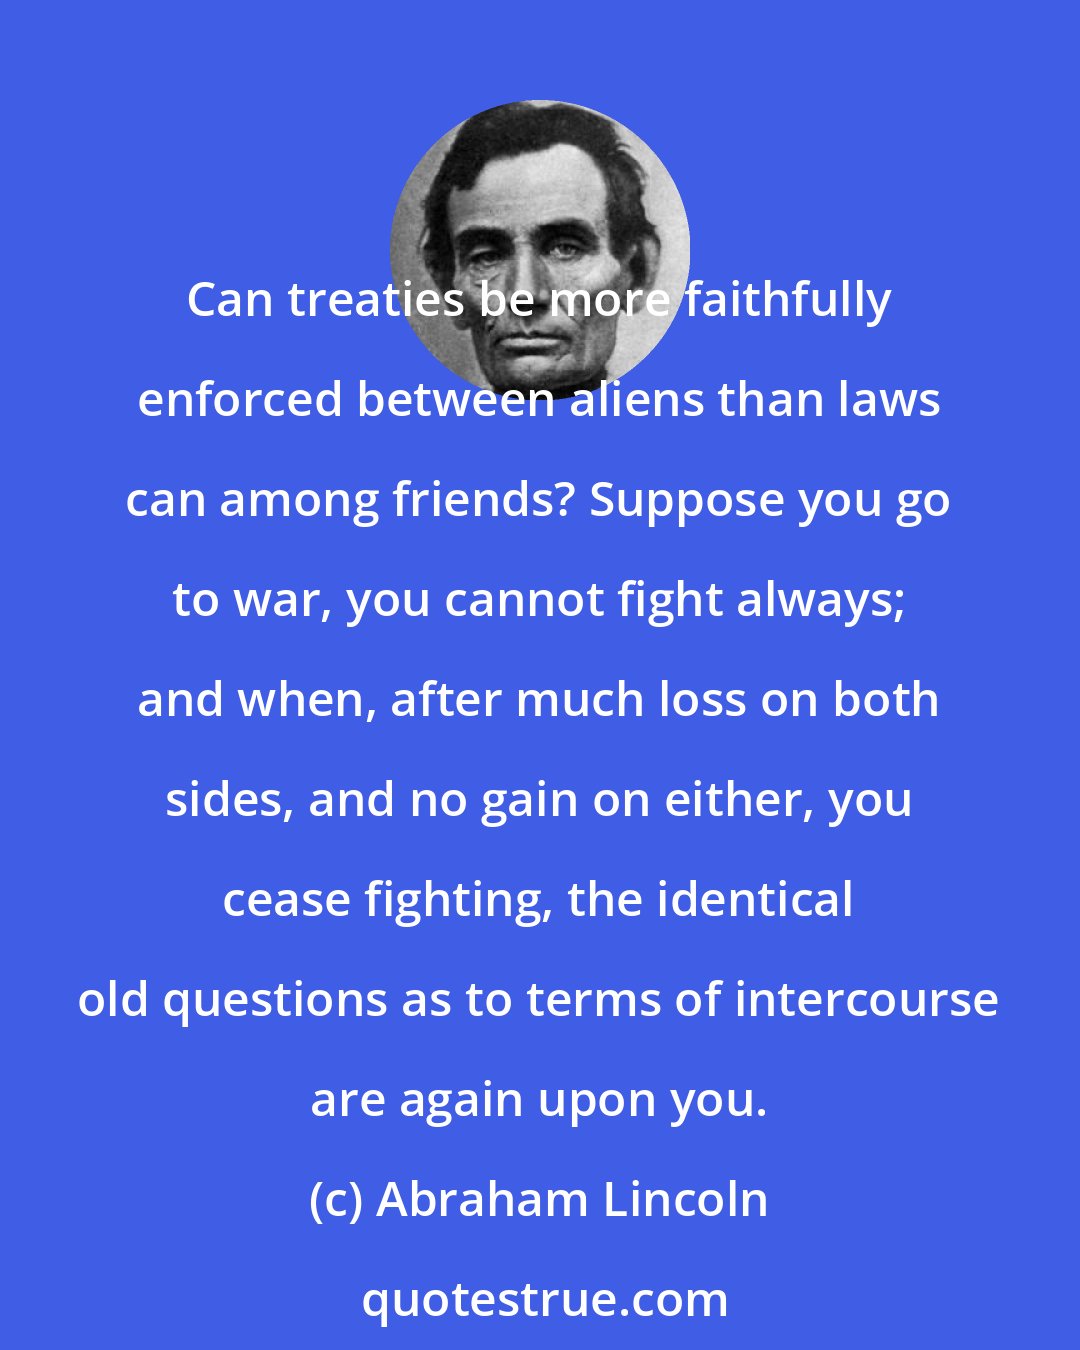 Abraham Lincoln: Can treaties be more faithfully enforced between aliens than laws can among friends? Suppose you go to war, you cannot fight always; and when, after much loss on both sides, and no gain on either, you cease fighting, the identical old questions as to terms of intercourse are again upon you.